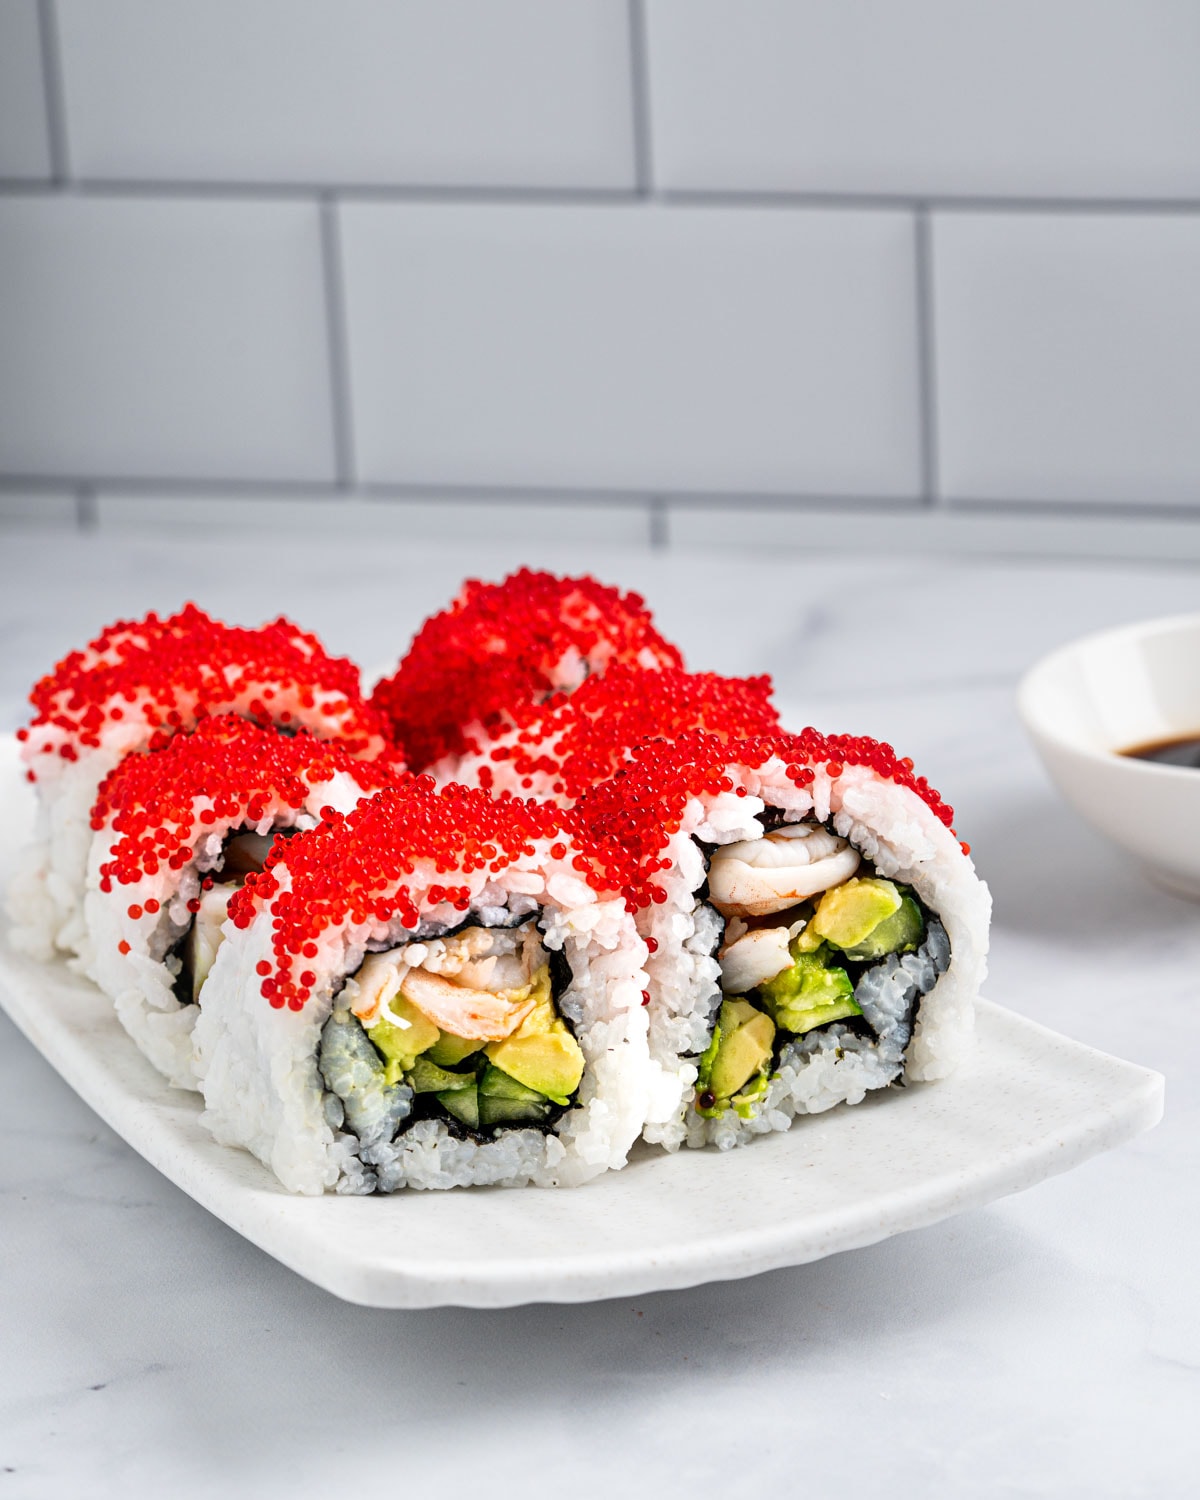 6 Boston Rolls topped with tobiko standing up on a white plate showing the filling which contains poached shrimp, avocado and cucumber.